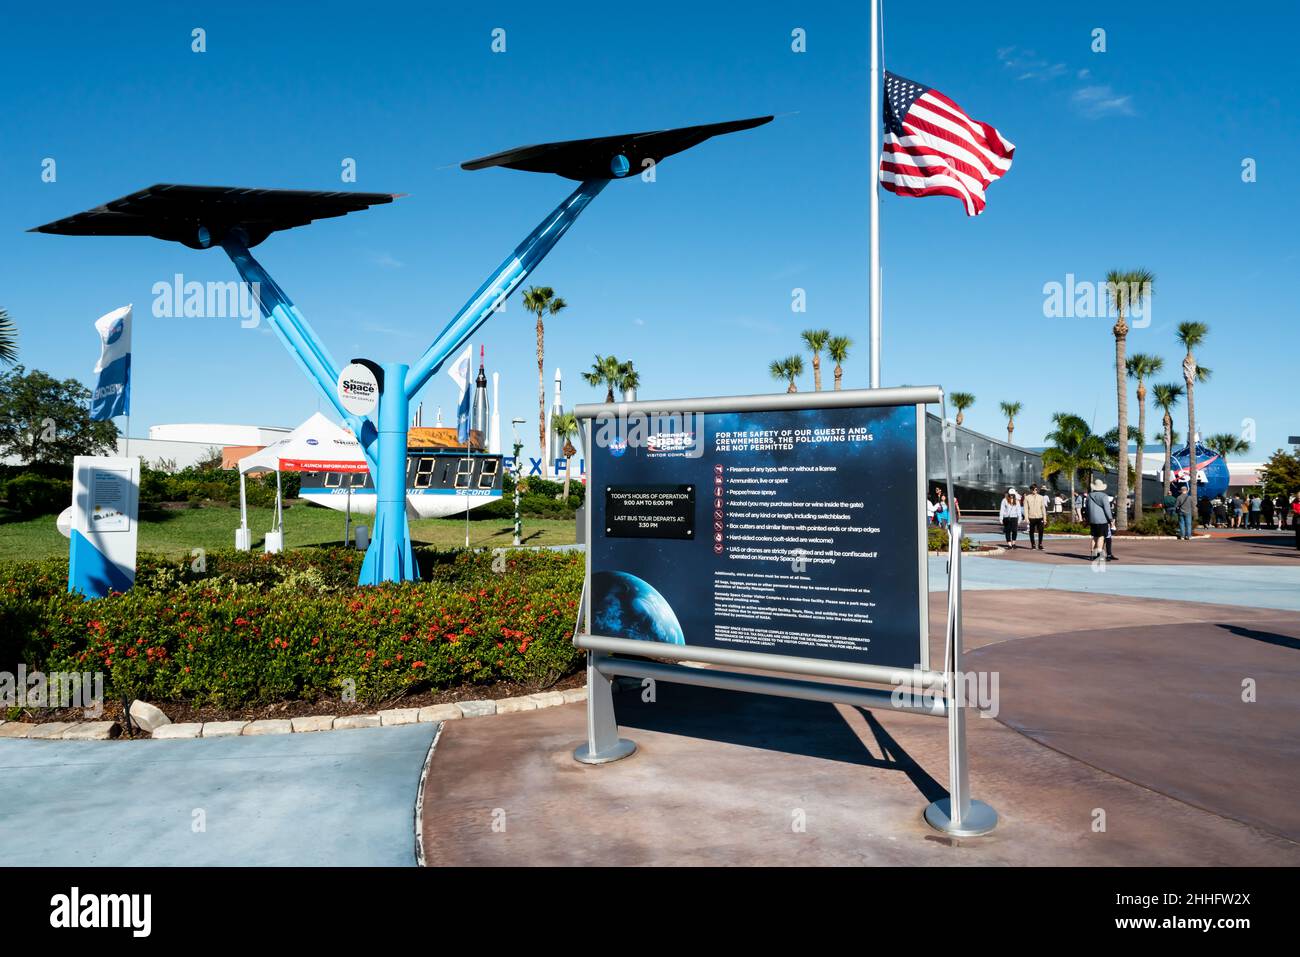 Cape Canaveral, Florida, Vereinigte Staaten von Amerika - DEZEMBER 2018: Ankunft am Kennedy Space Center Visitor Complex in Cape Canaveral, Florida, USA. Stockfoto